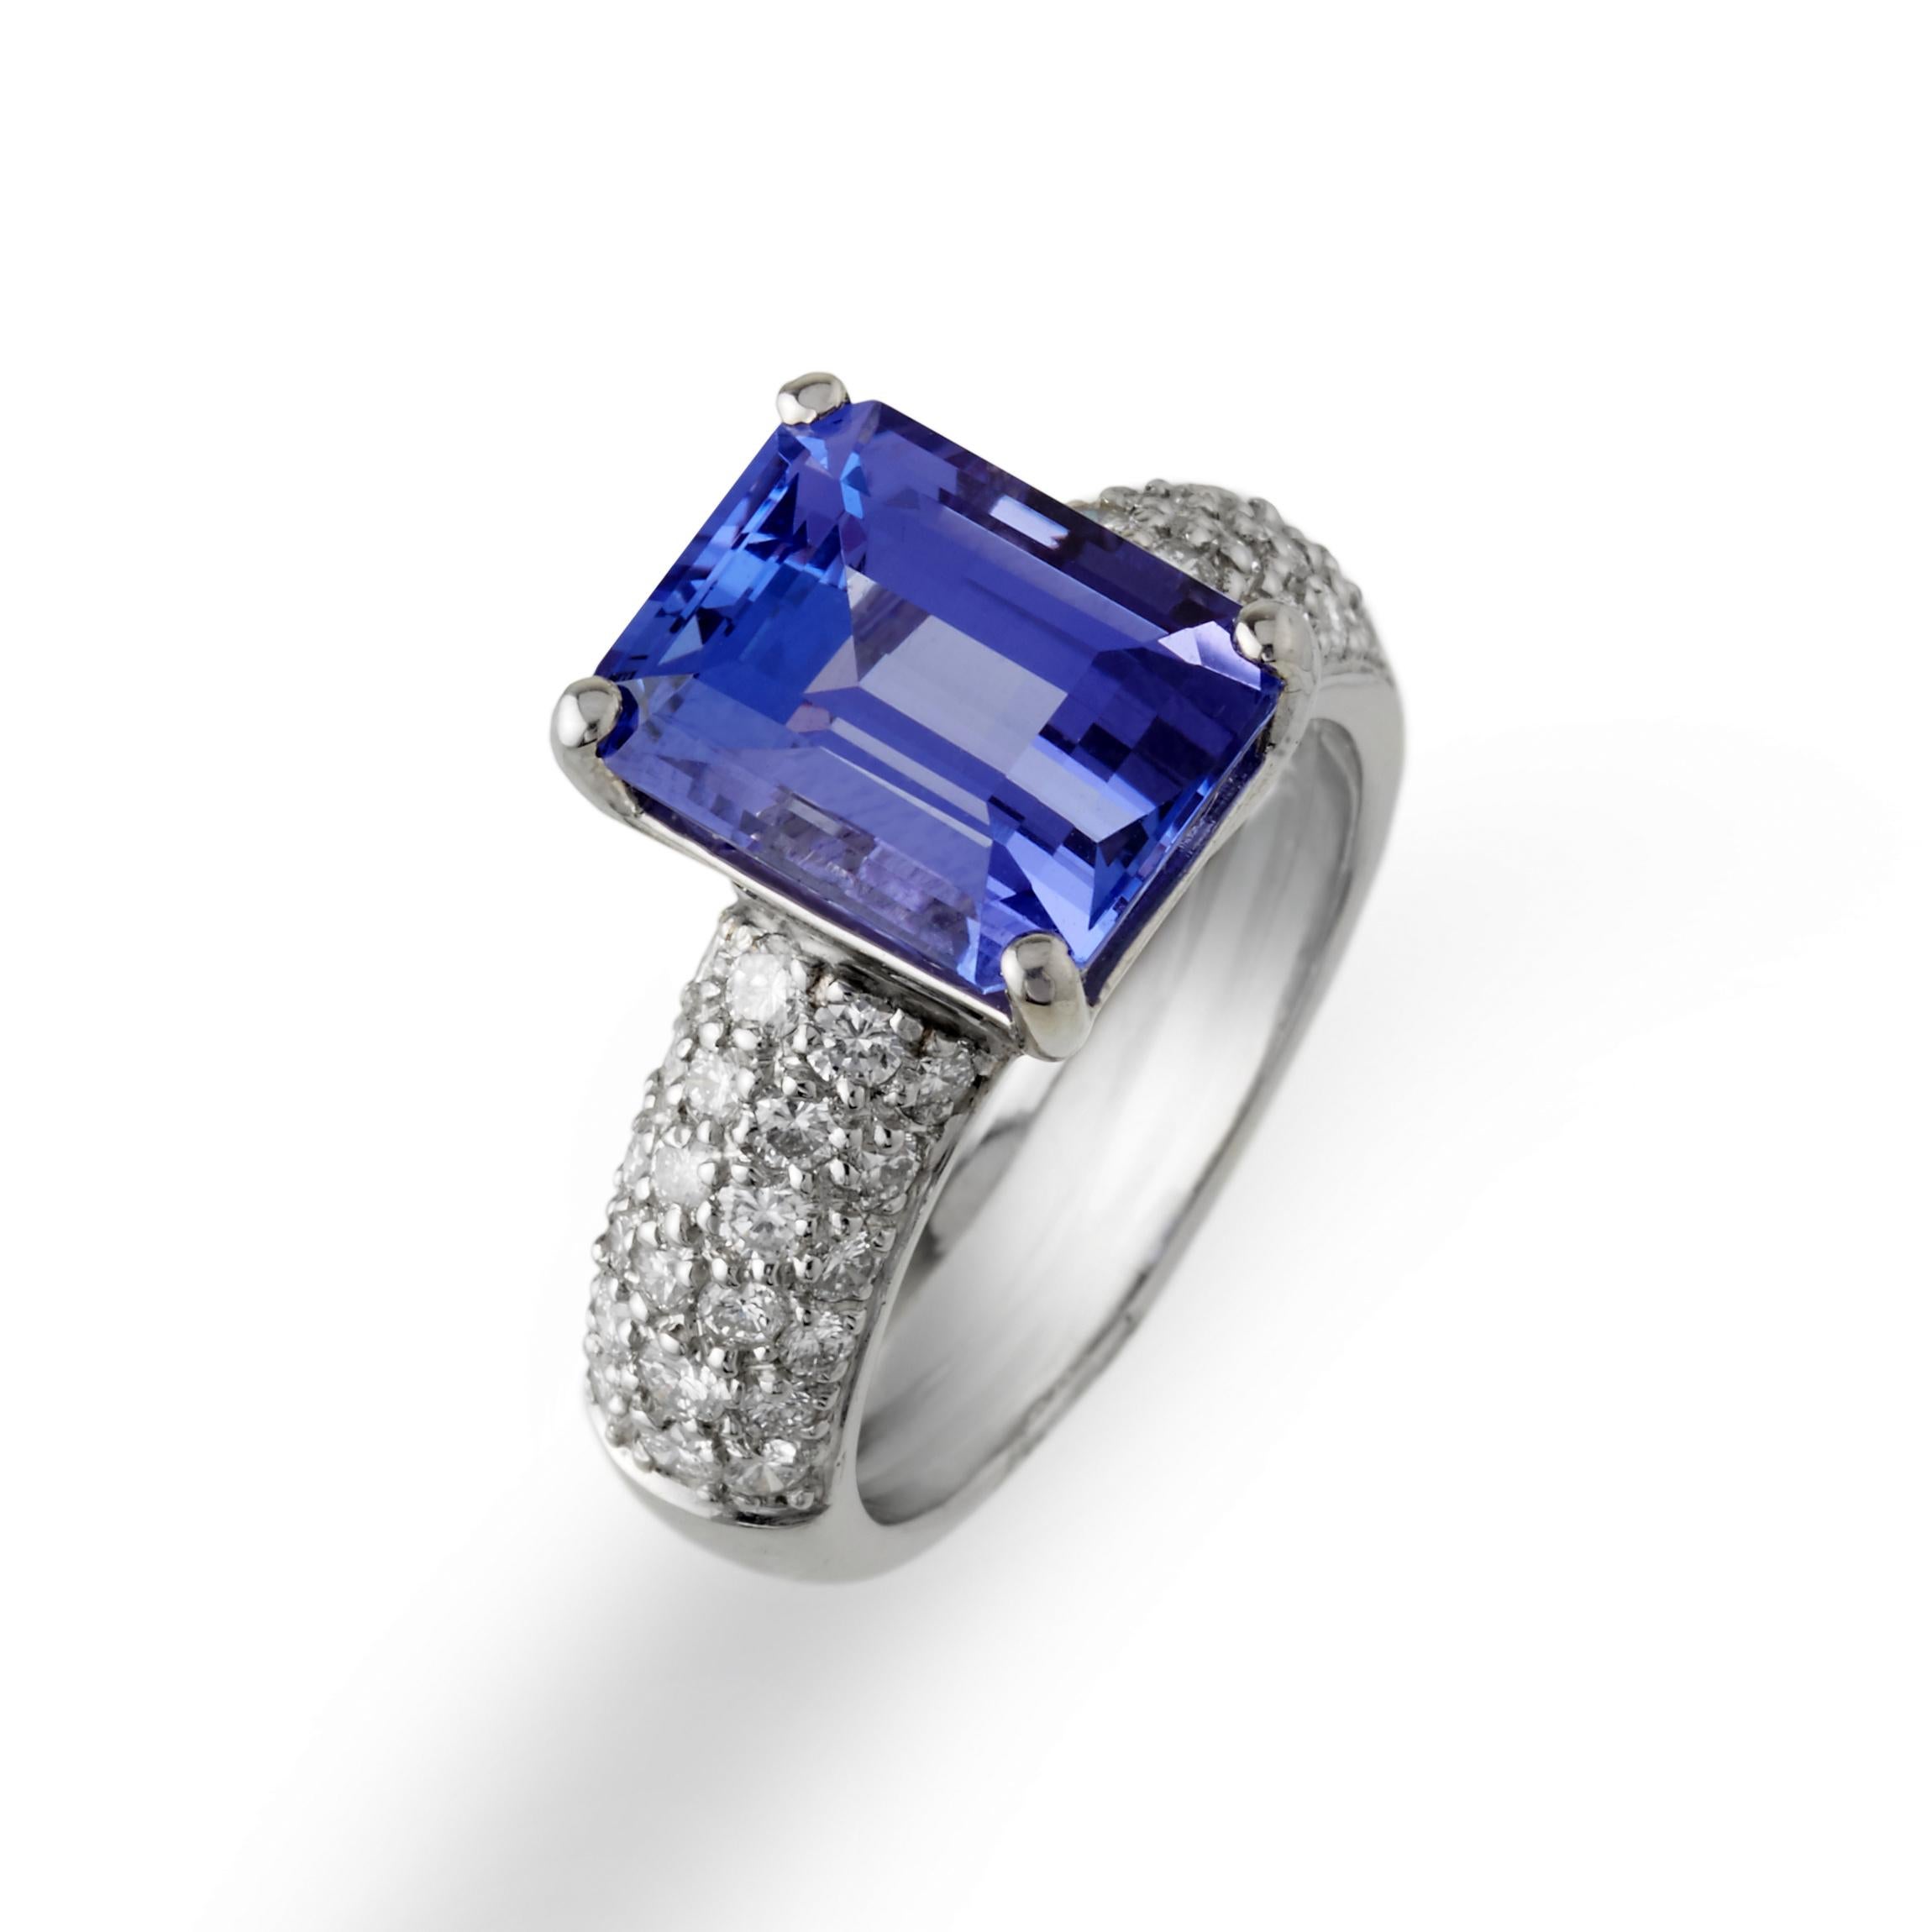 This sublime tanzanite, 5.80ct , is set over a fine pave white diamond embellished platinum fashion ring. This ring could also serve as a beautiful engagement ring for someone who enjoys the riches of a deep blue gemstone. The simplicity of the ring